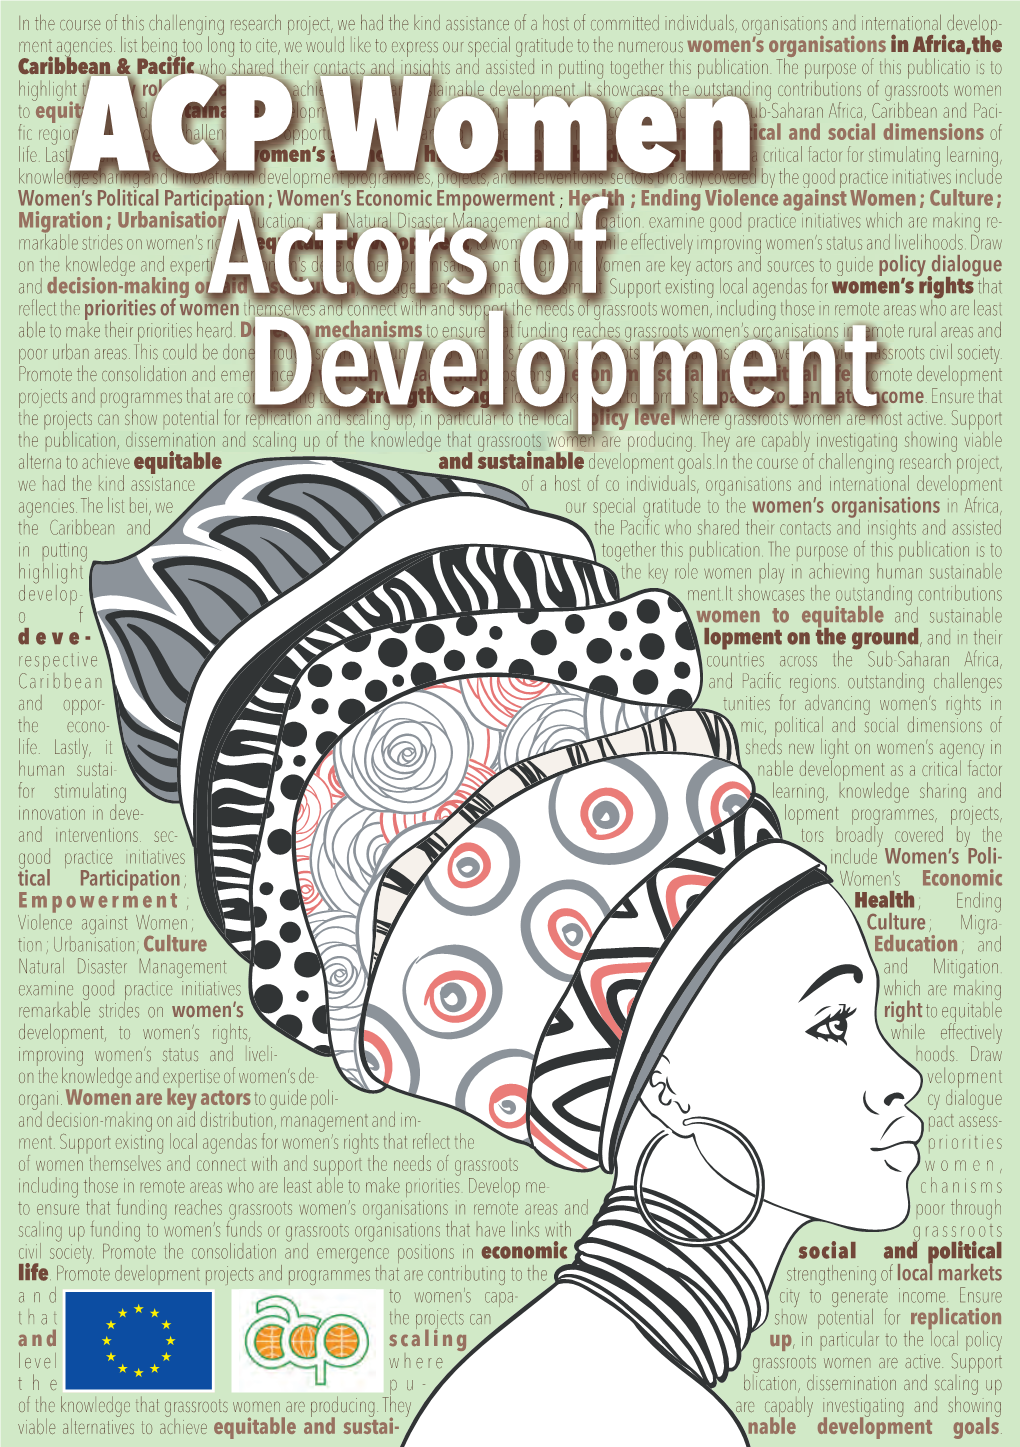 ACP Women, Actors of Development « an Initiative of the ACP Secretariat, Funded by the European Union »